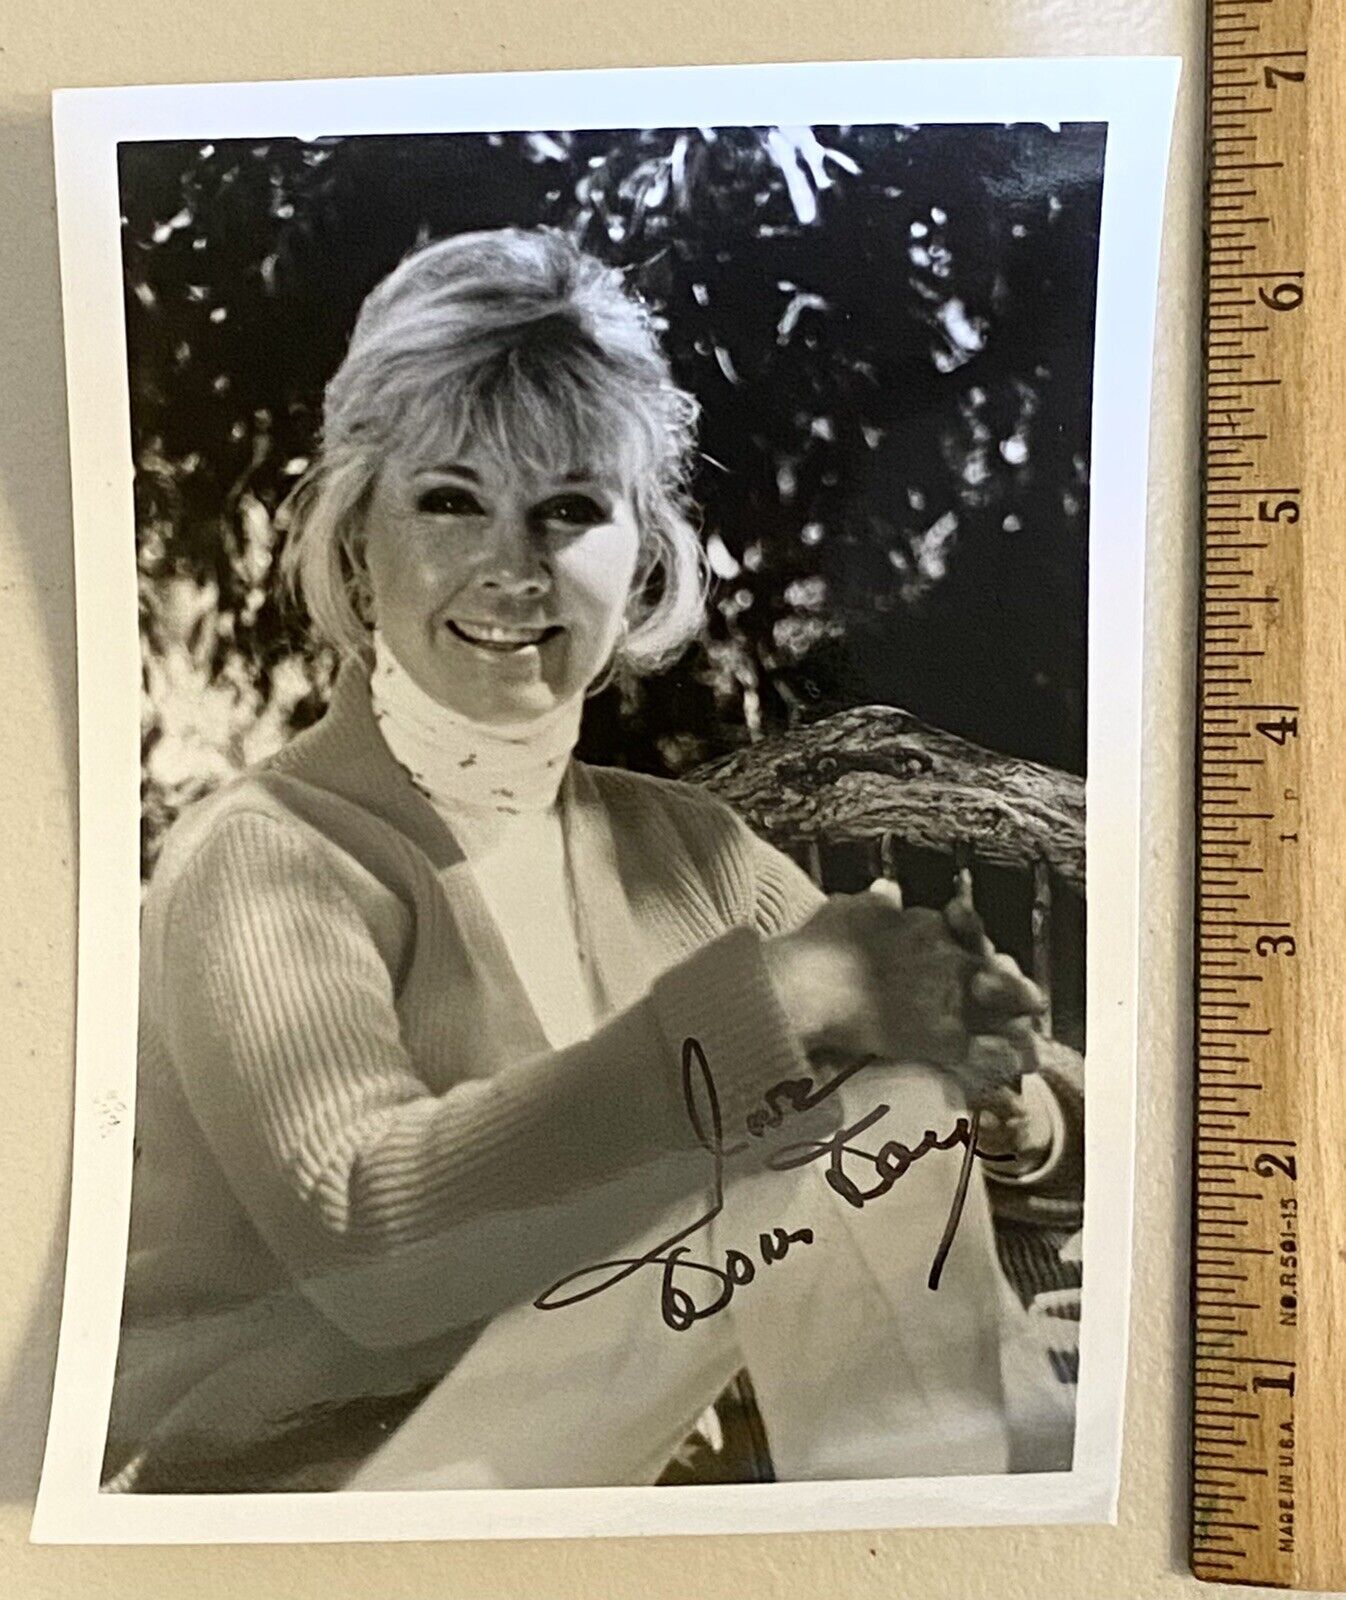 Doris Day Signed 5x7 Vintage Photo Poster painting Inscribed “love” Autographed Calamity Jane